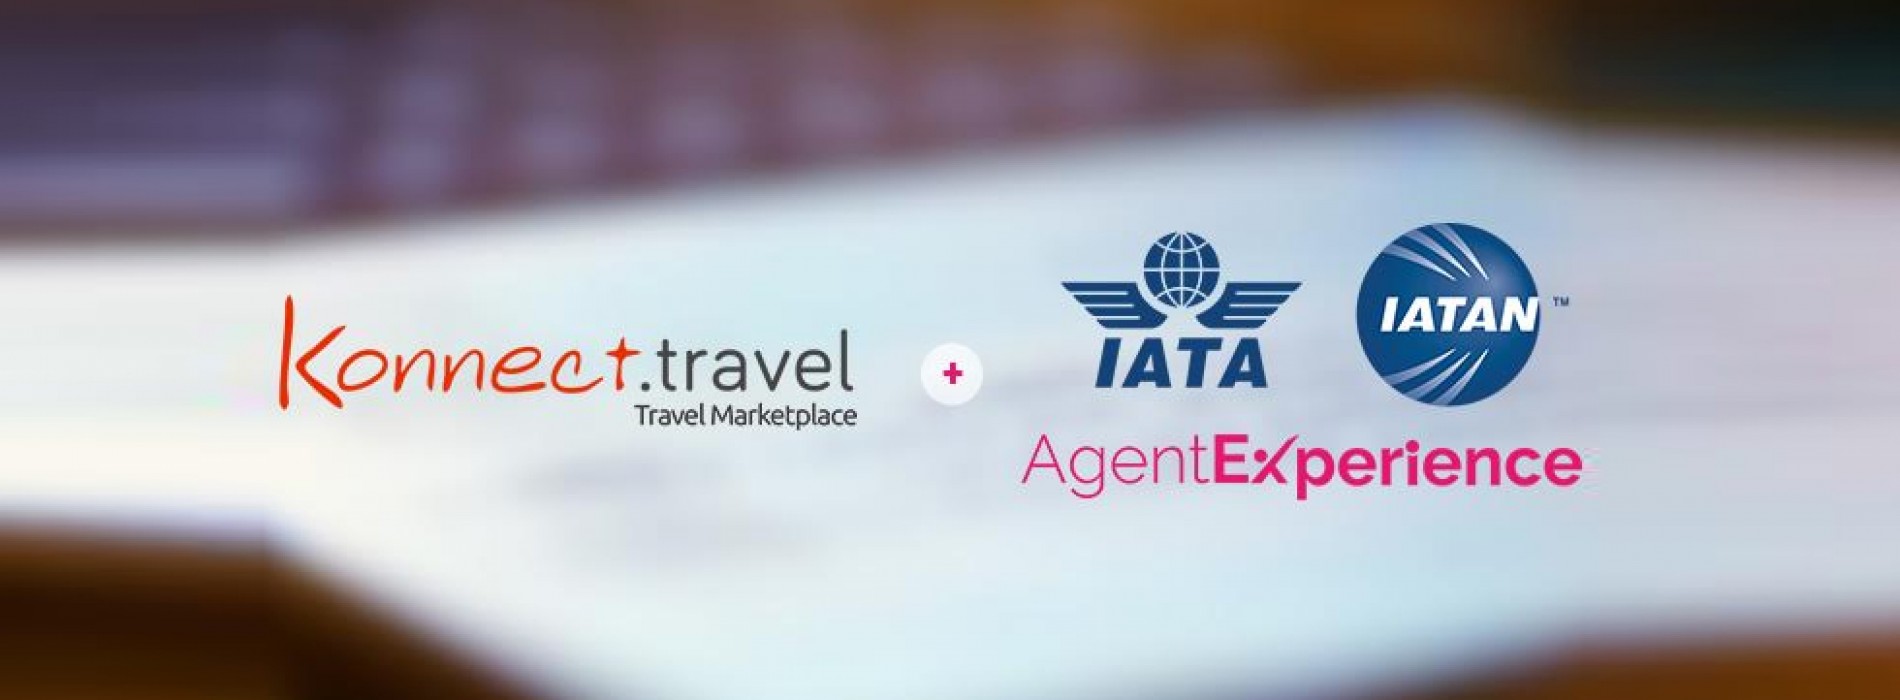 QuadLabs & IATA jointly launch the new AgentExperience site based on Konnect platform